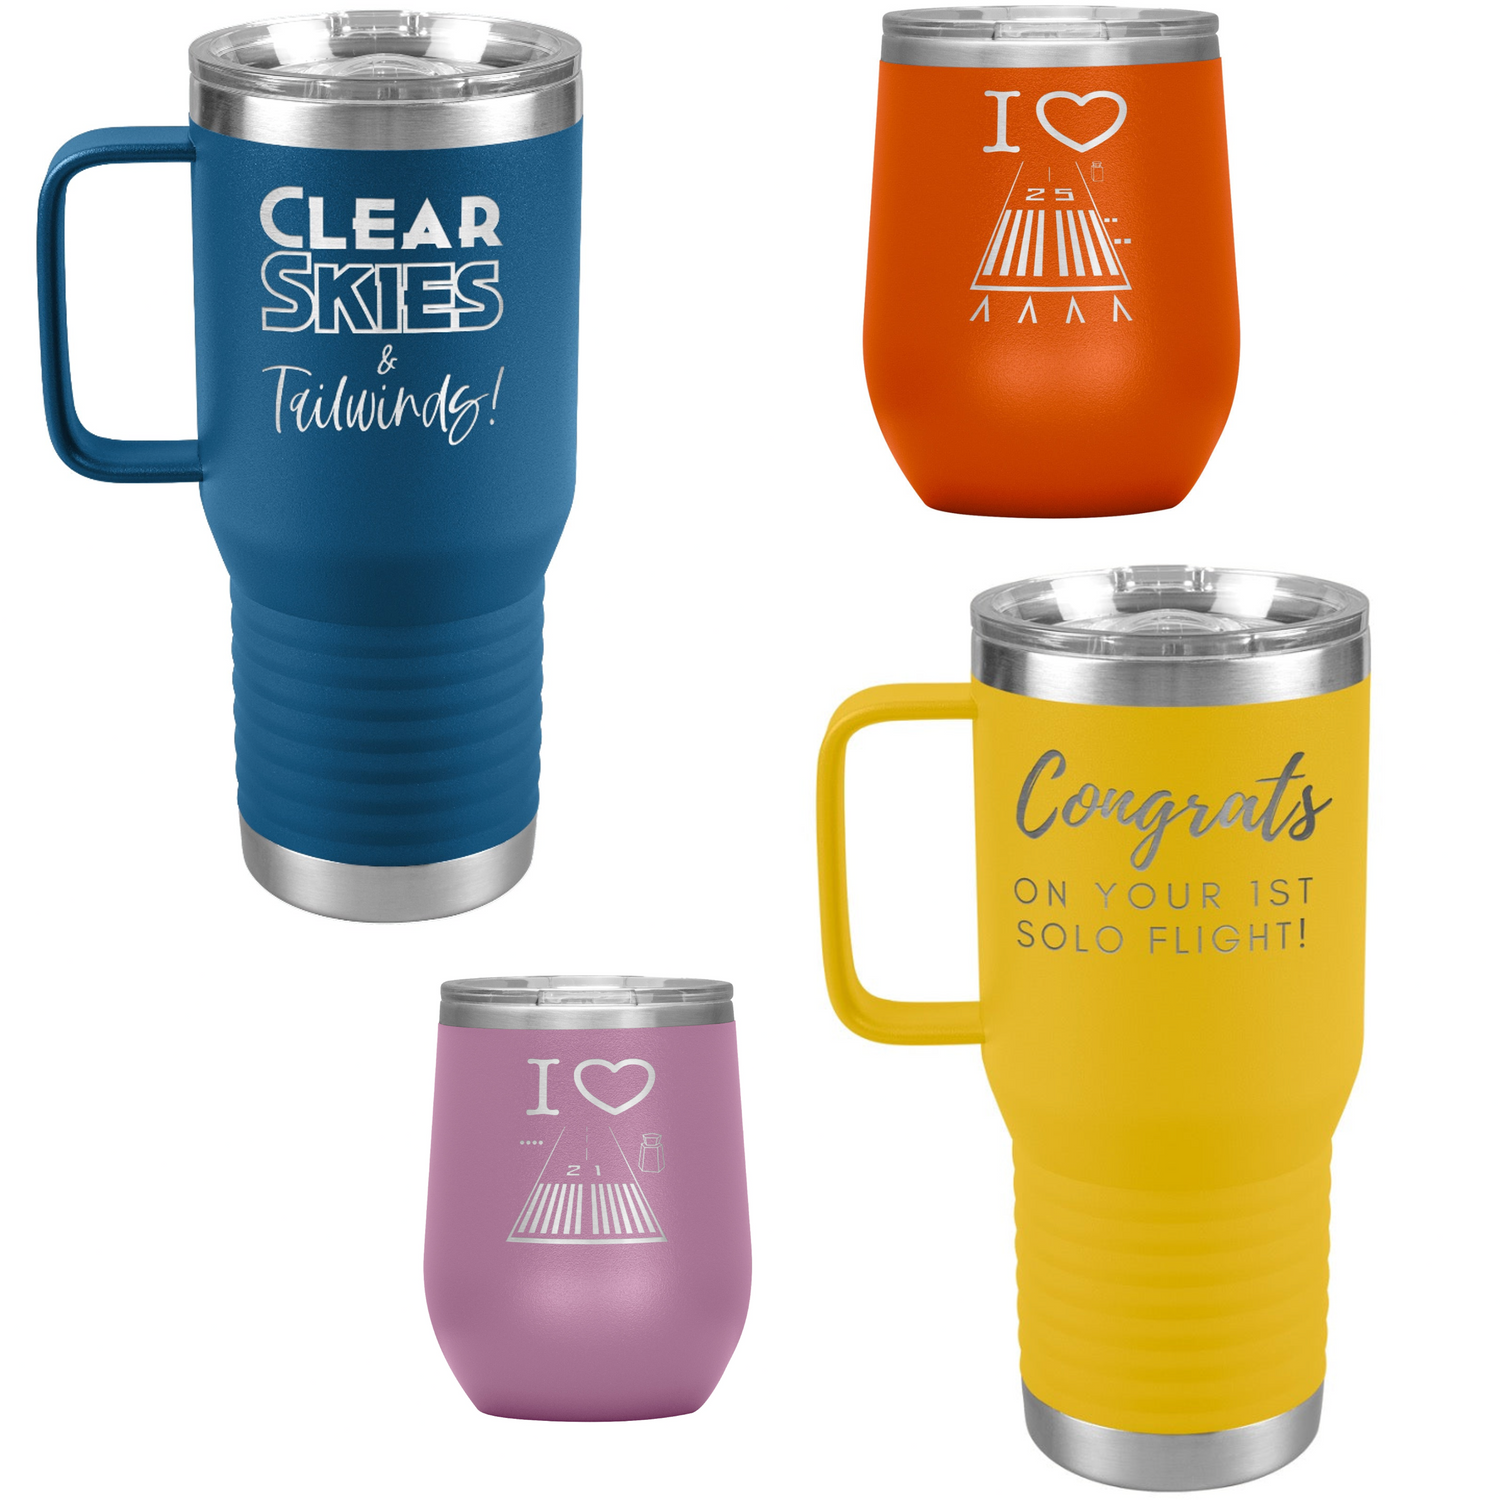 12 and 20 oz. aviation themed tumblers